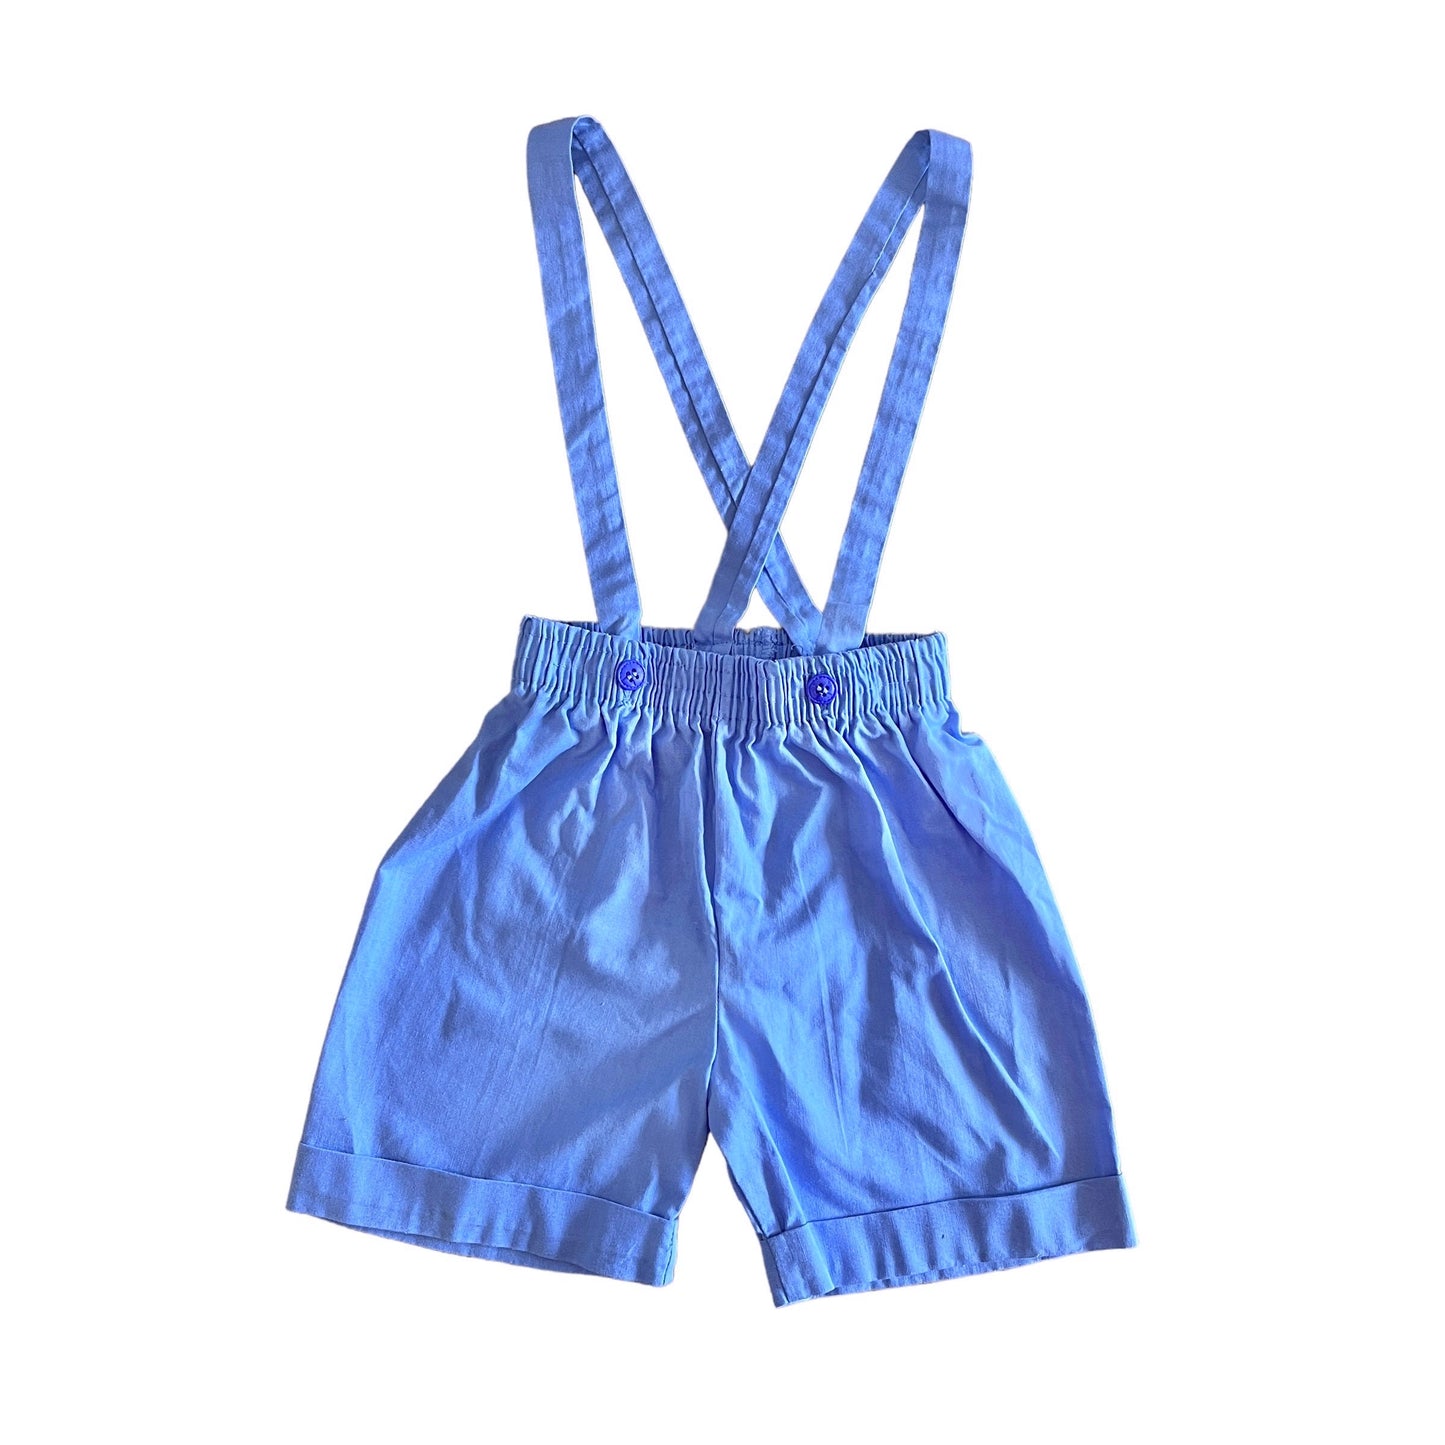 1970s Blue Toddler Suspenders Shorts 12-18 Months